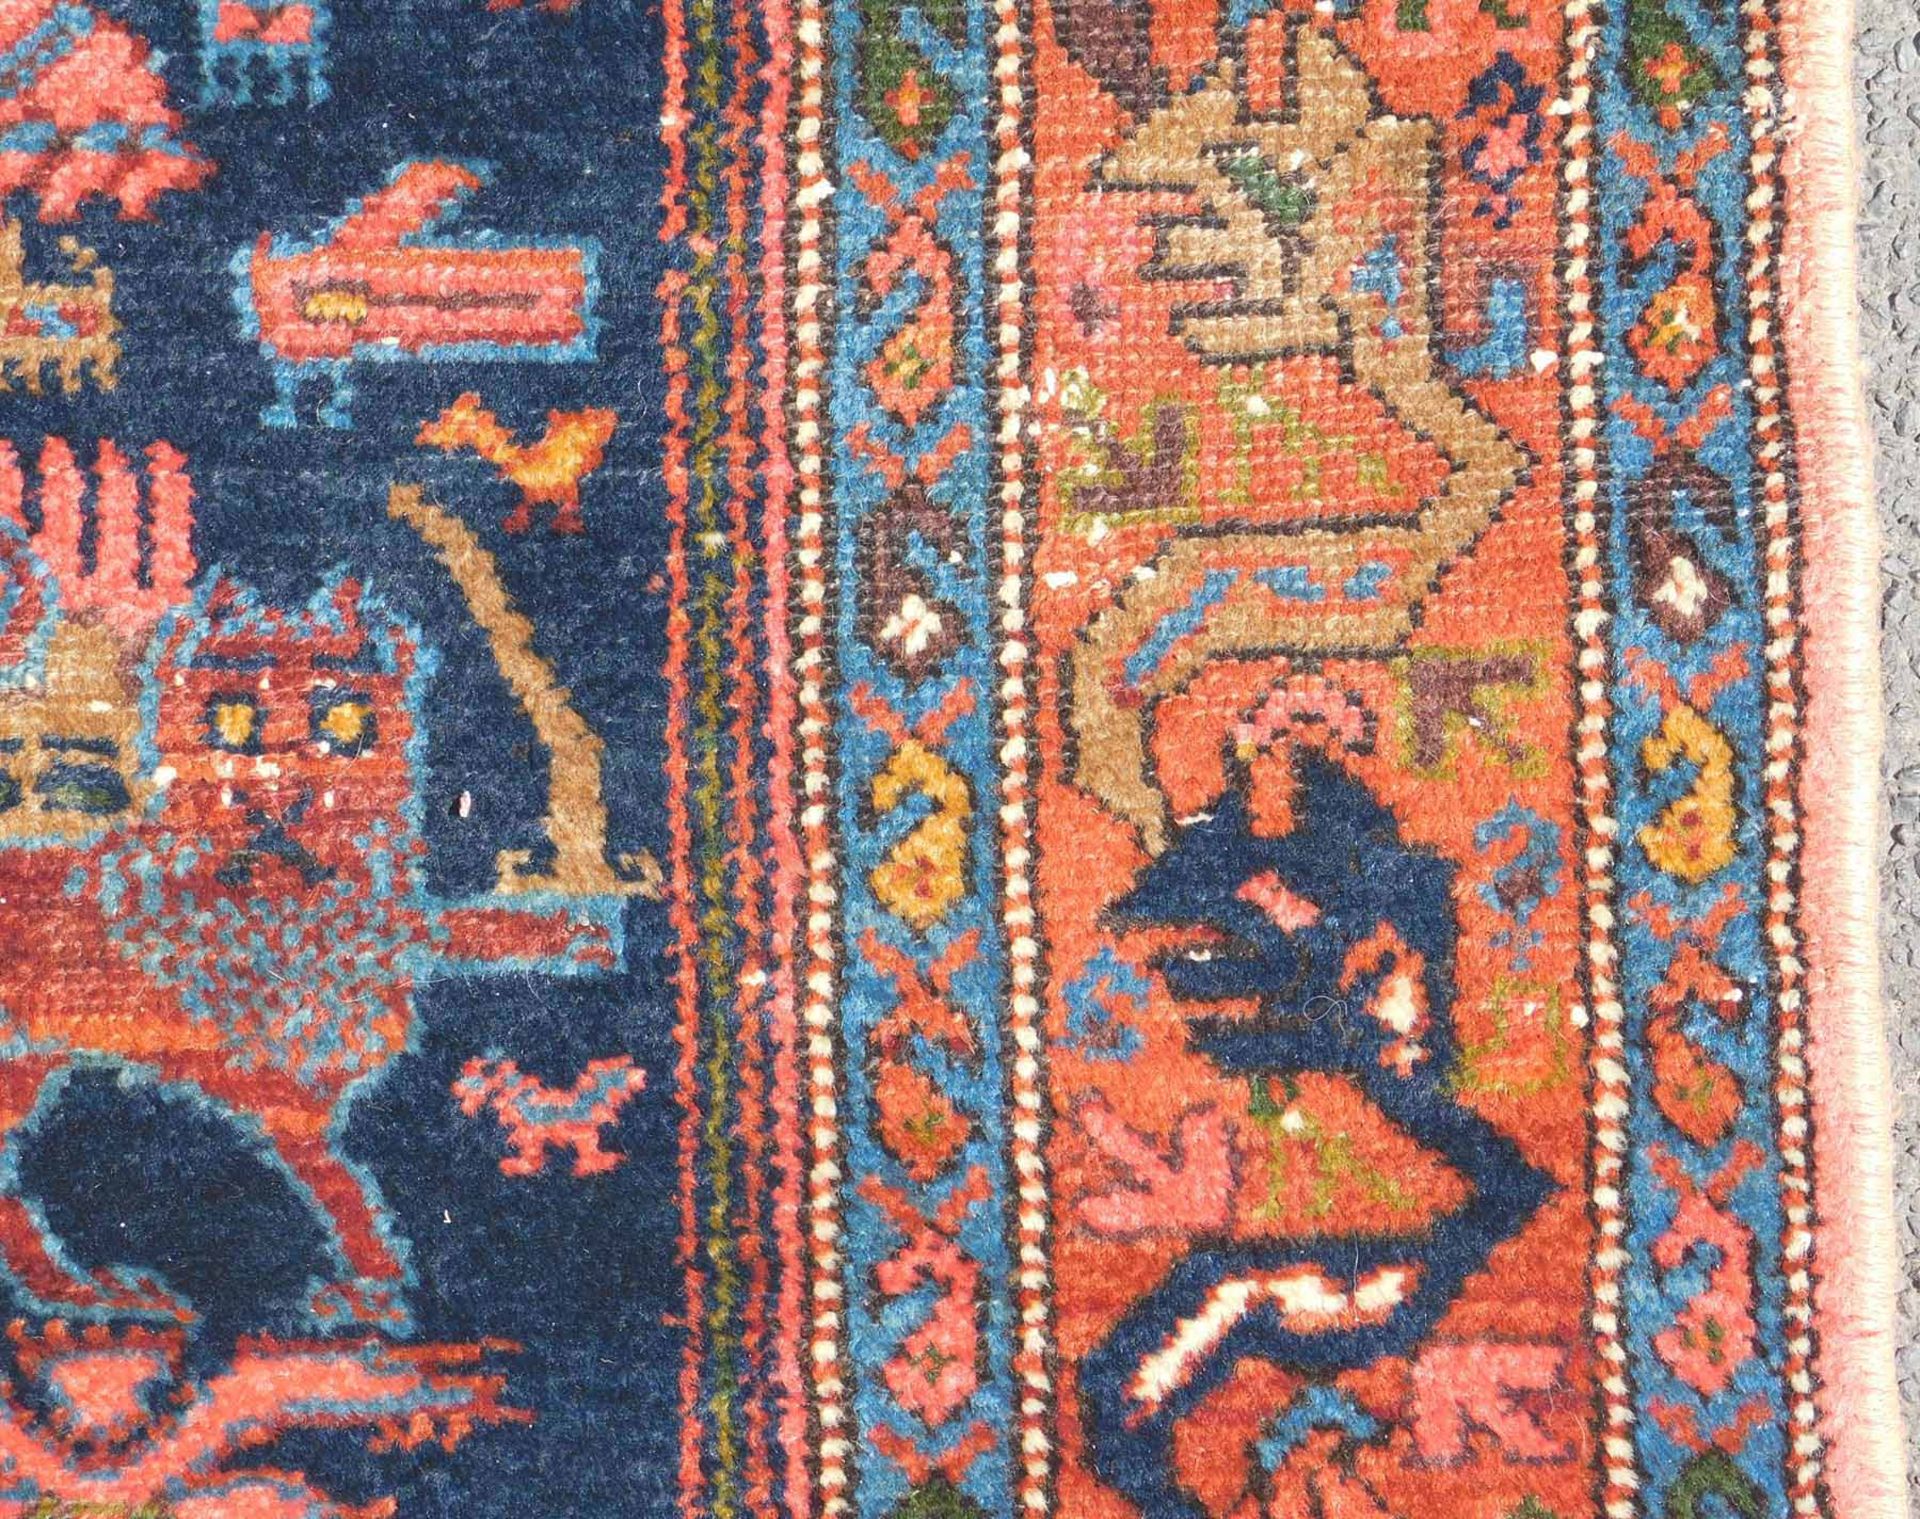 Nahawand Persian rug. Iran. Old. 1st Half of the 20th century.197 cm x 130 cm. Knotted by hand. Wool - Image 2 of 11